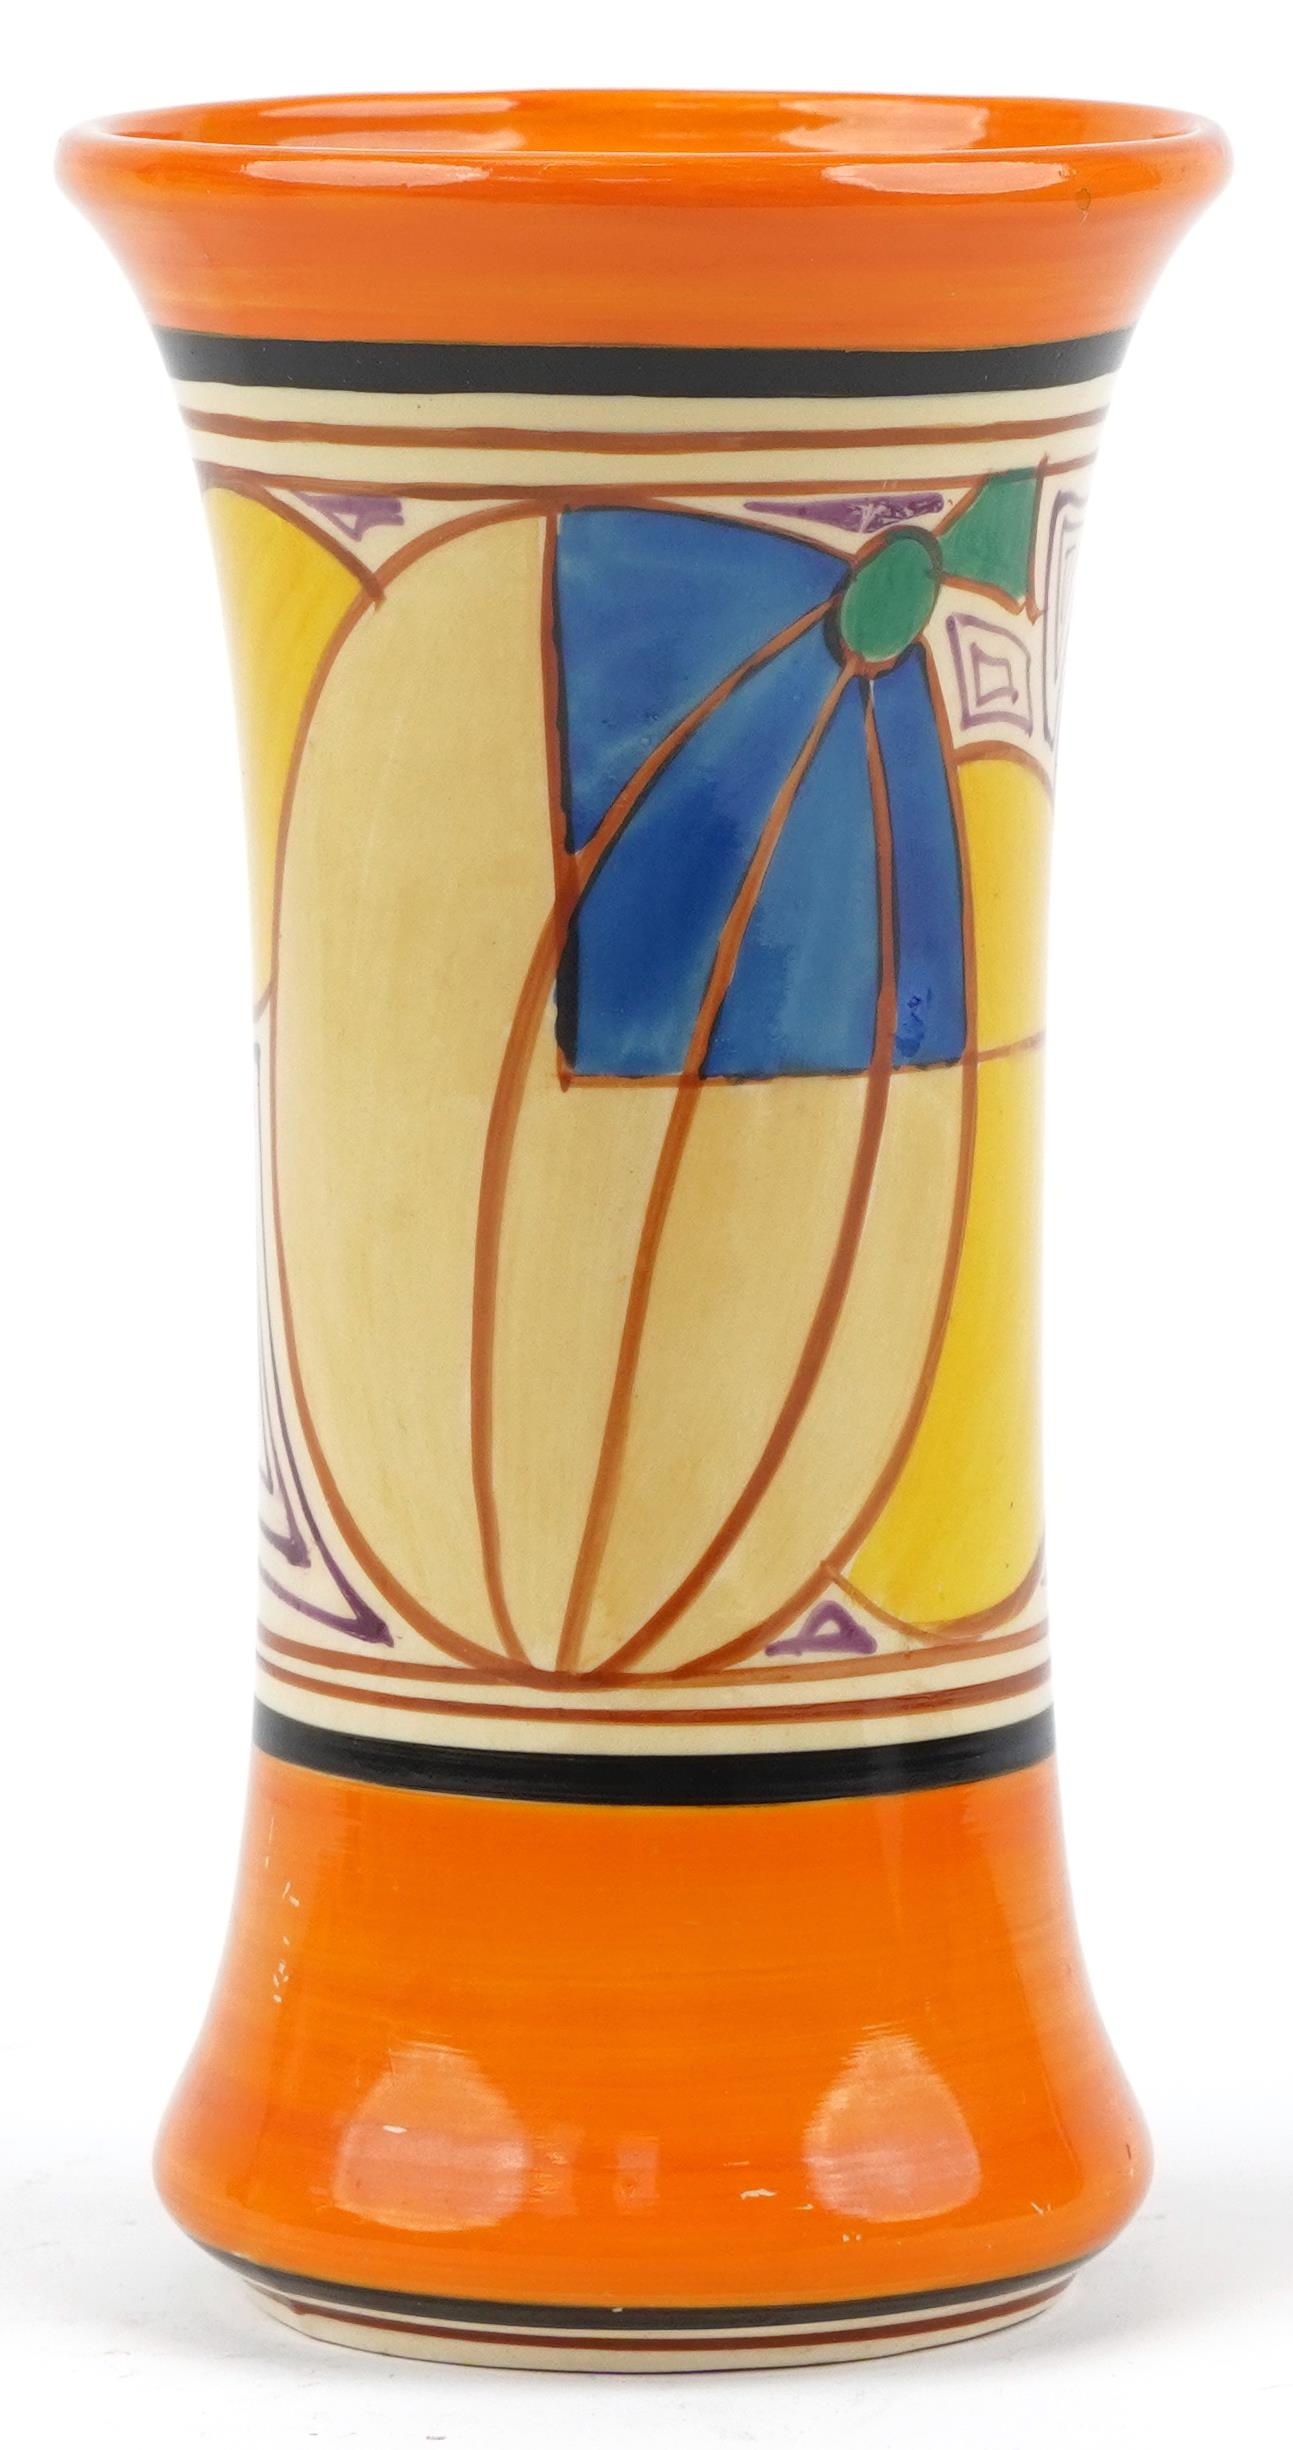 Clarice Cliff, Art Deco Fantastique Bizarre vase hand painted in the melon pattern, numbered 205 - Image 3 of 7